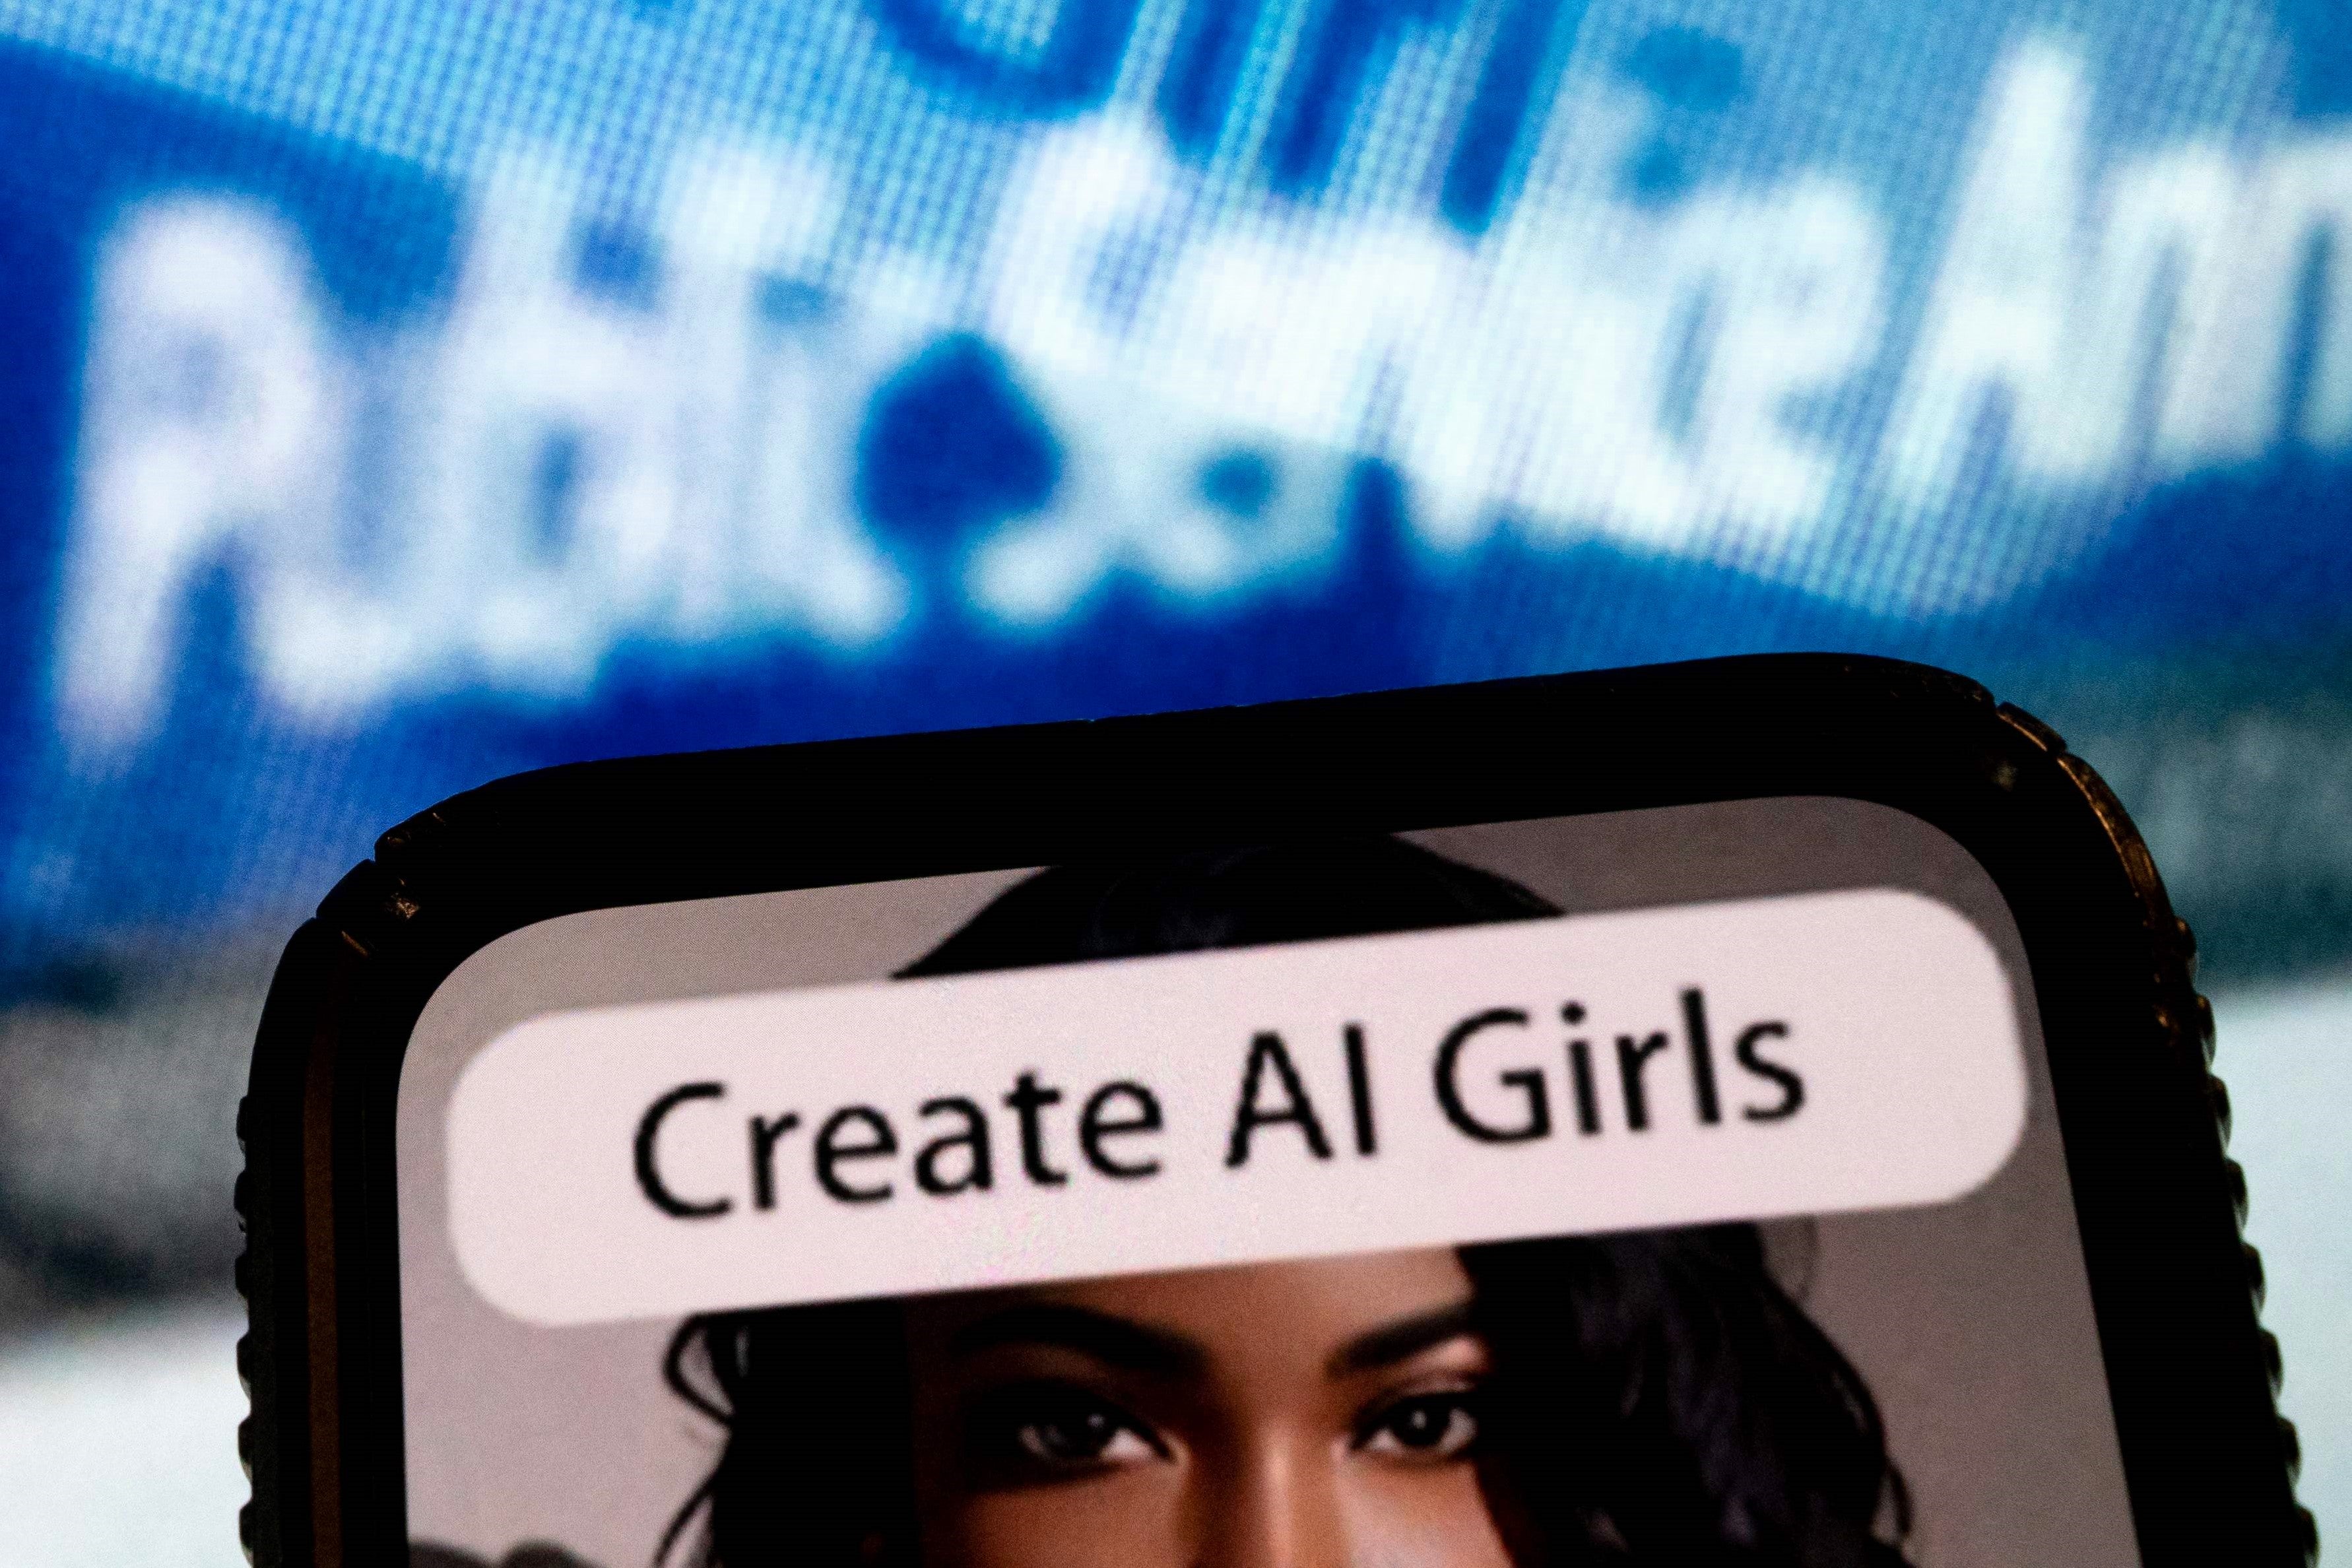 An advertisement to create AI girls shown on a phone screen on 18 July, 2023, in Washington, DC